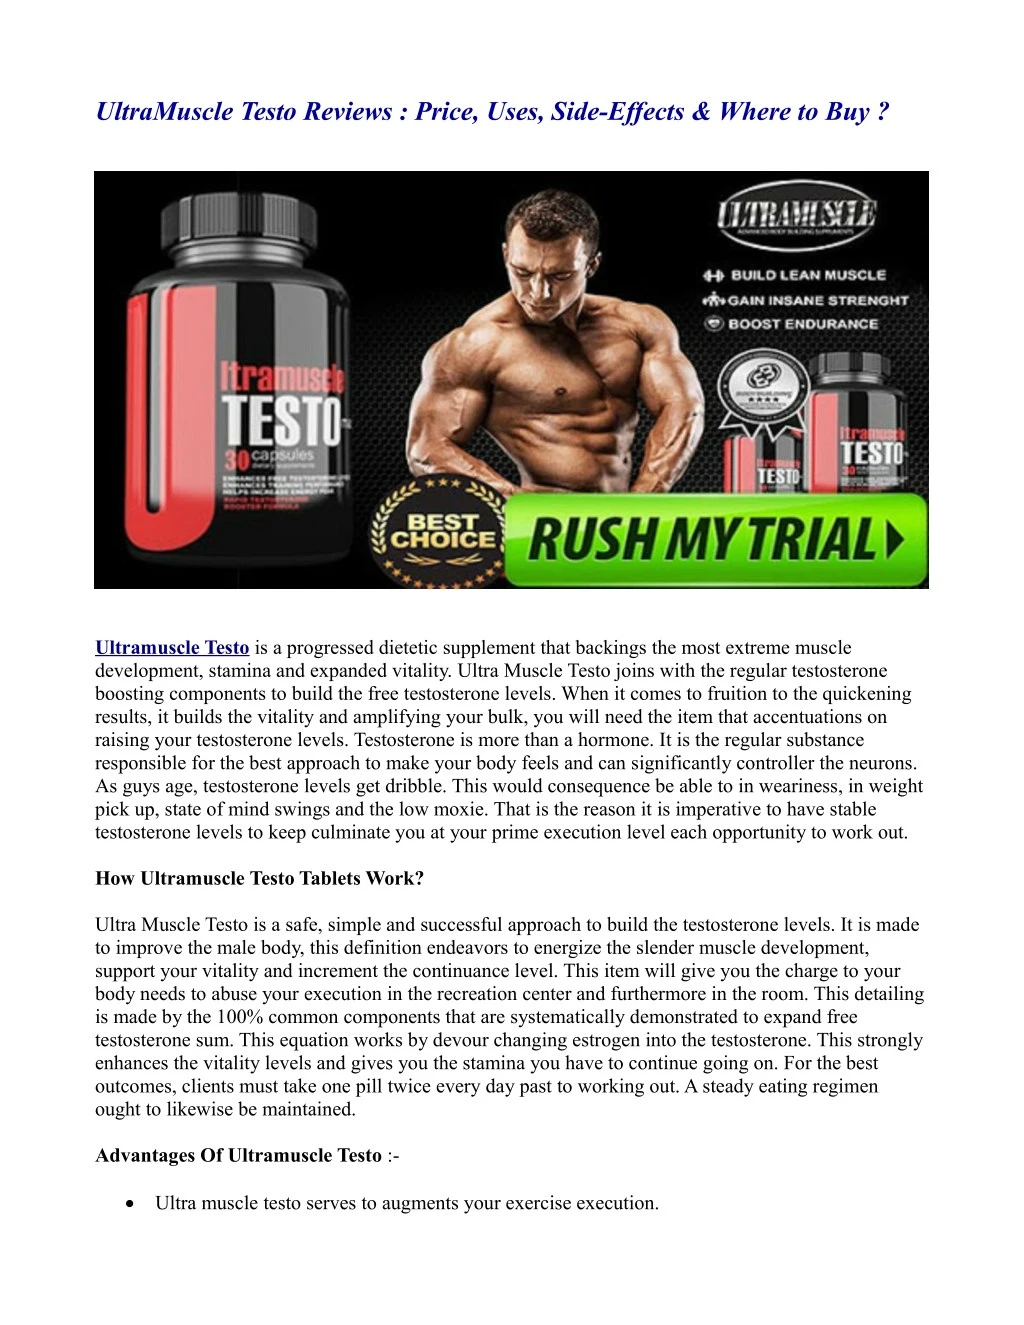 ultramuscle testo reviews price uses side effects